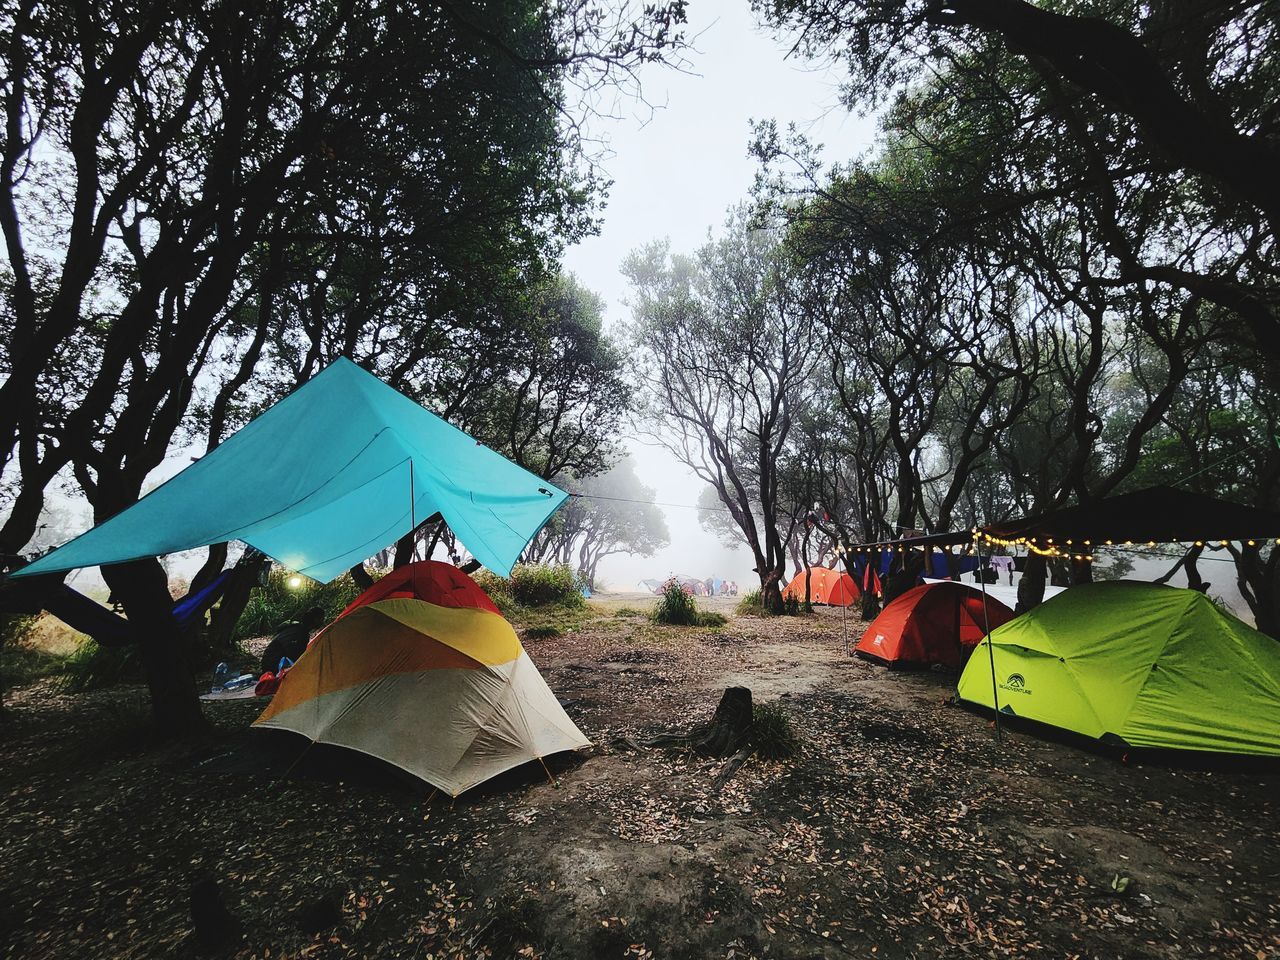 tent, tree, camping, plant, nature, land, day, sky, adventure, umbrella, outdoors, no people, forest, environment, multi colored, beauty in nature, sunlight, protection, non-urban scene, leisure activity